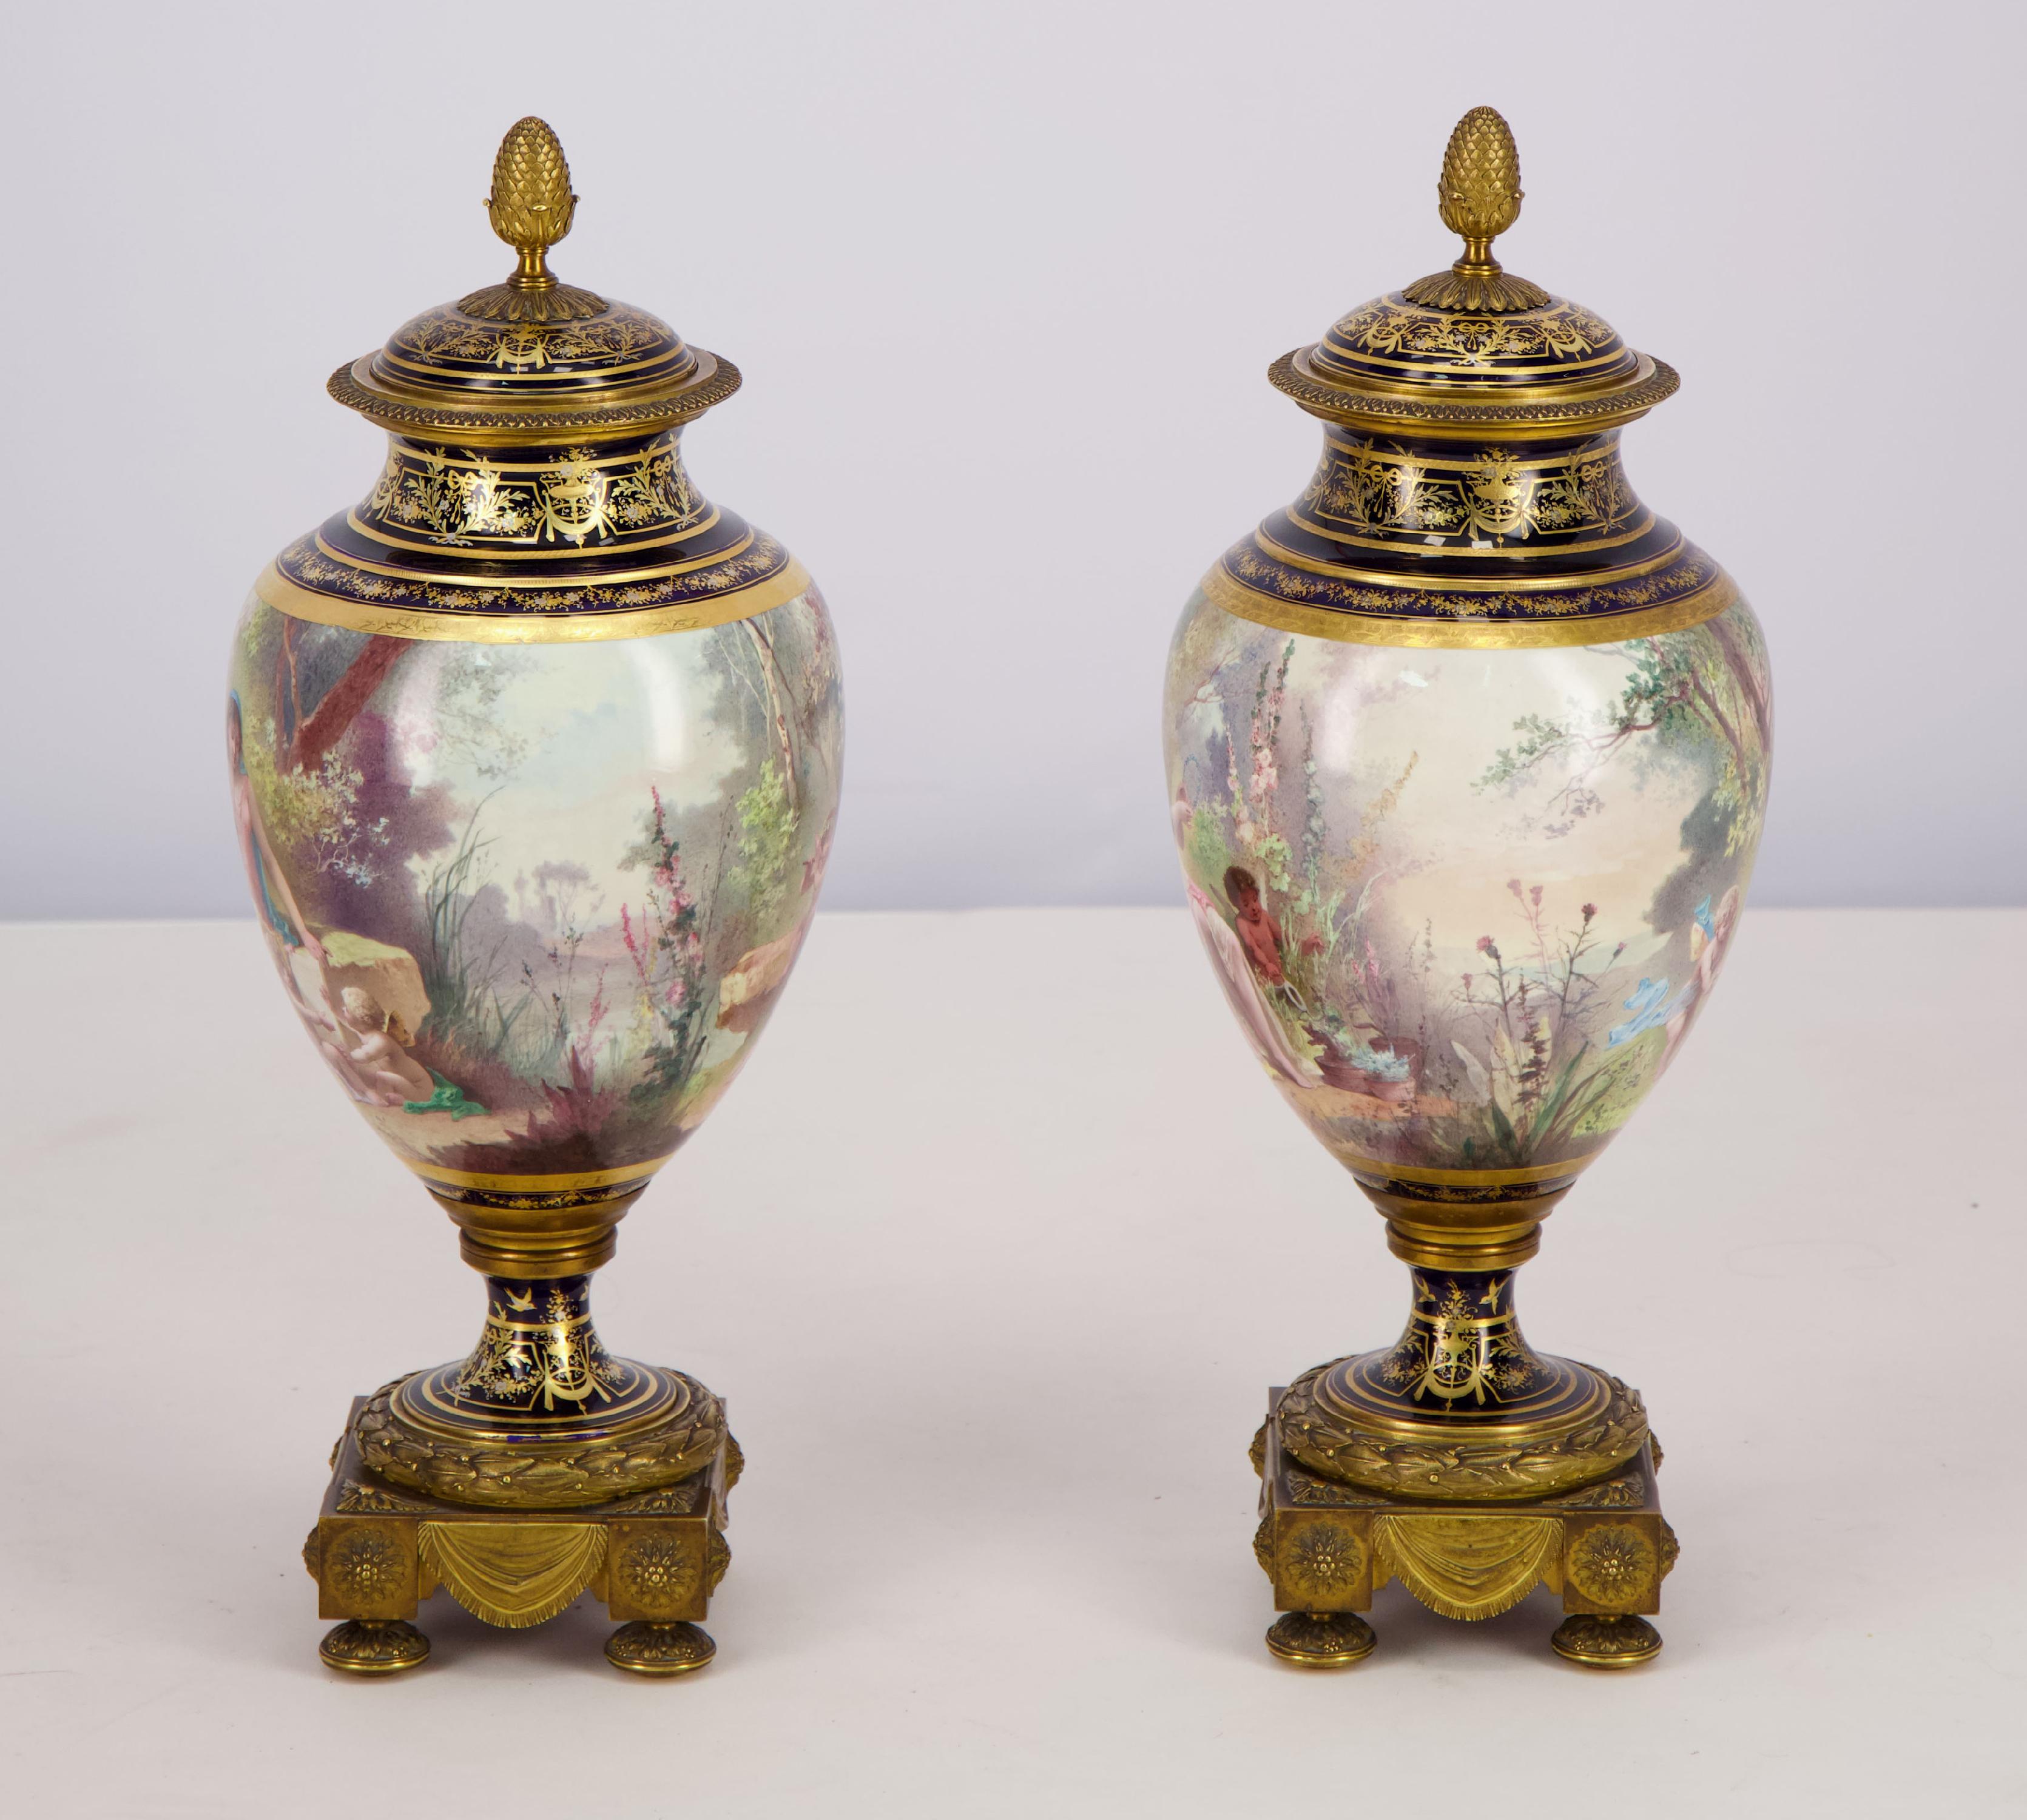 Pair of porcelain vases mounted in gilt bronze, circa 1890 For Sale 3